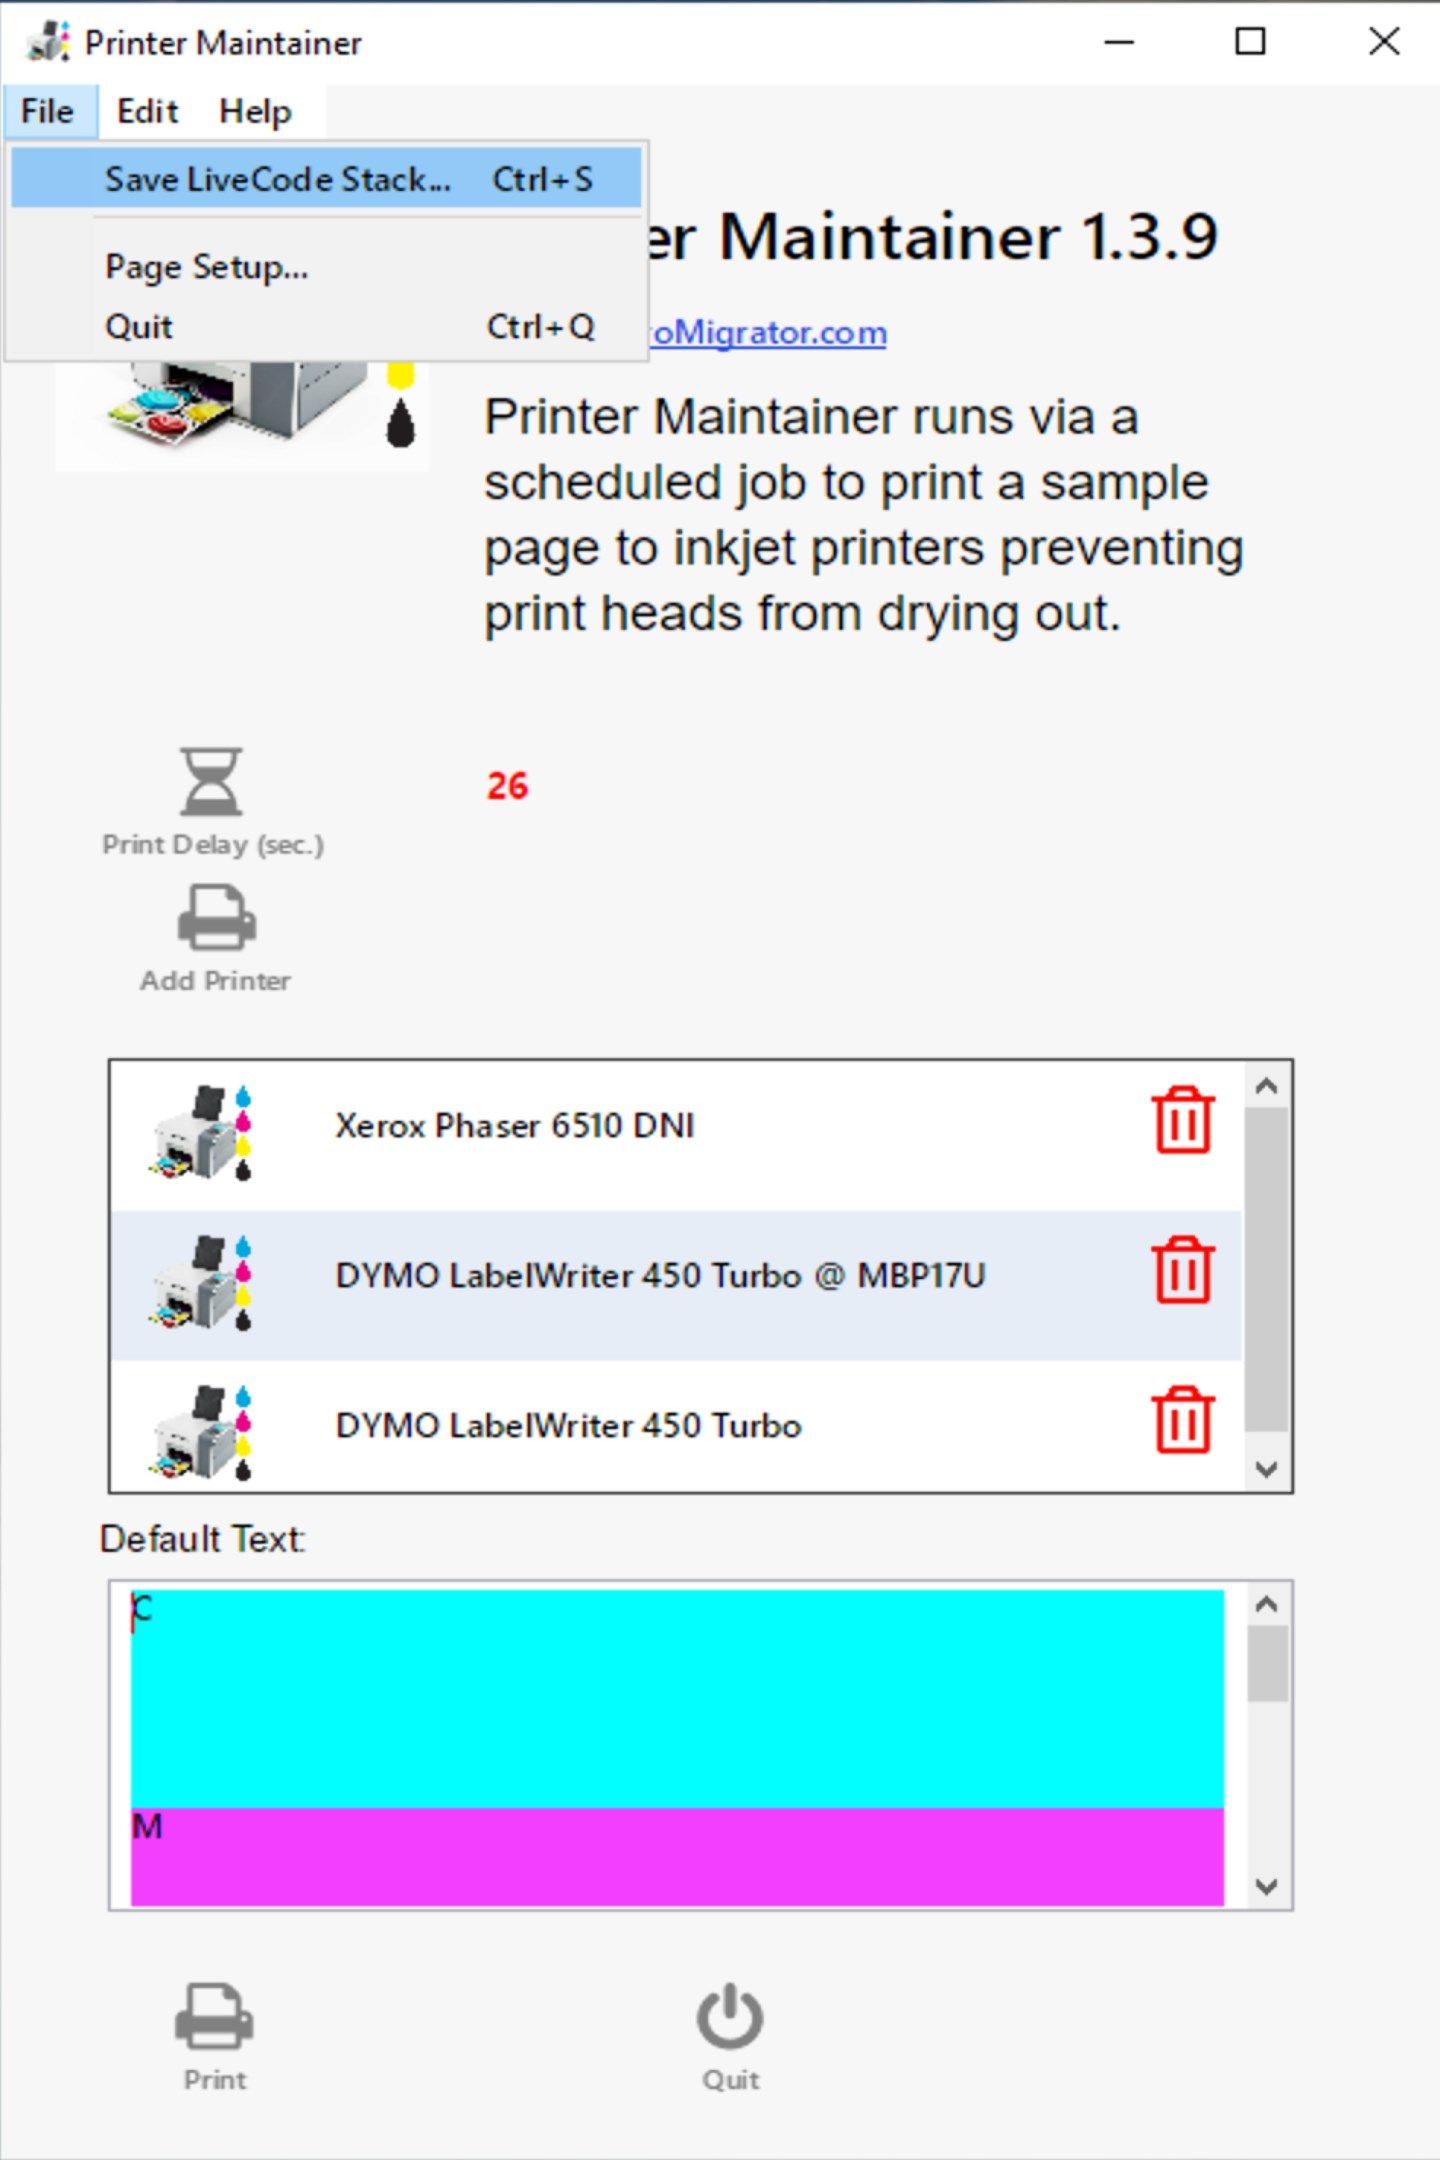 Printer Maintainer - Exporting LiveCode Stack Application Source Code from File Menu.